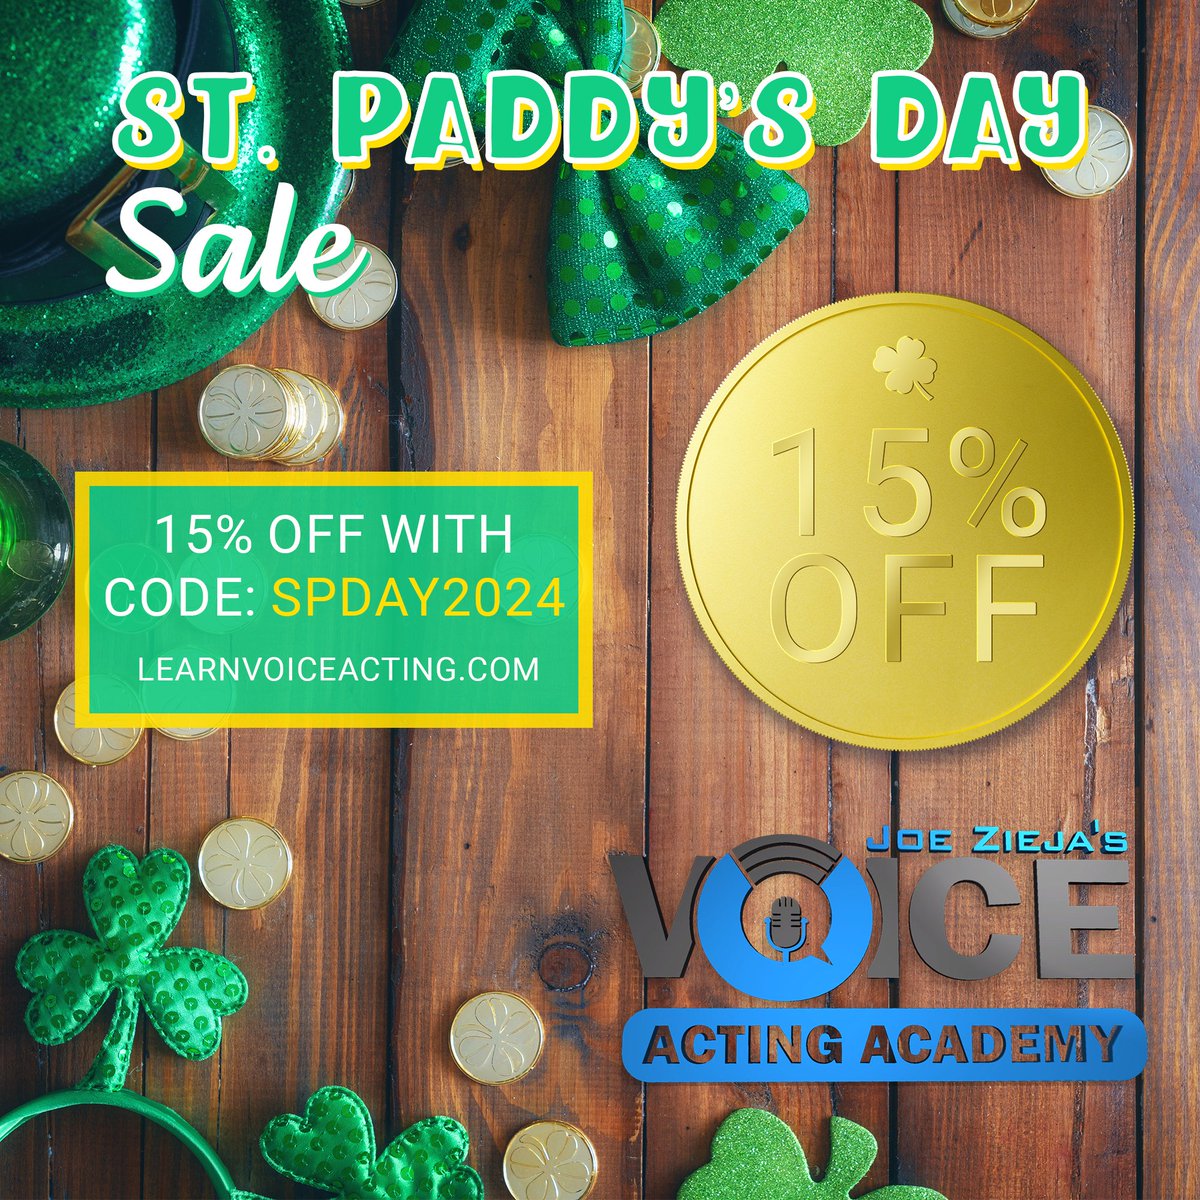 Hey Wriolette fans! Check out my OTP @JoeZieja's voice acting class - he's a fantastic talent. He's got a massive 30+ hour course with 120+ lessons on everything: understanding the genres of VO, finding and booking work, demos, and breaking down copy. St. Paddy's sale is today!